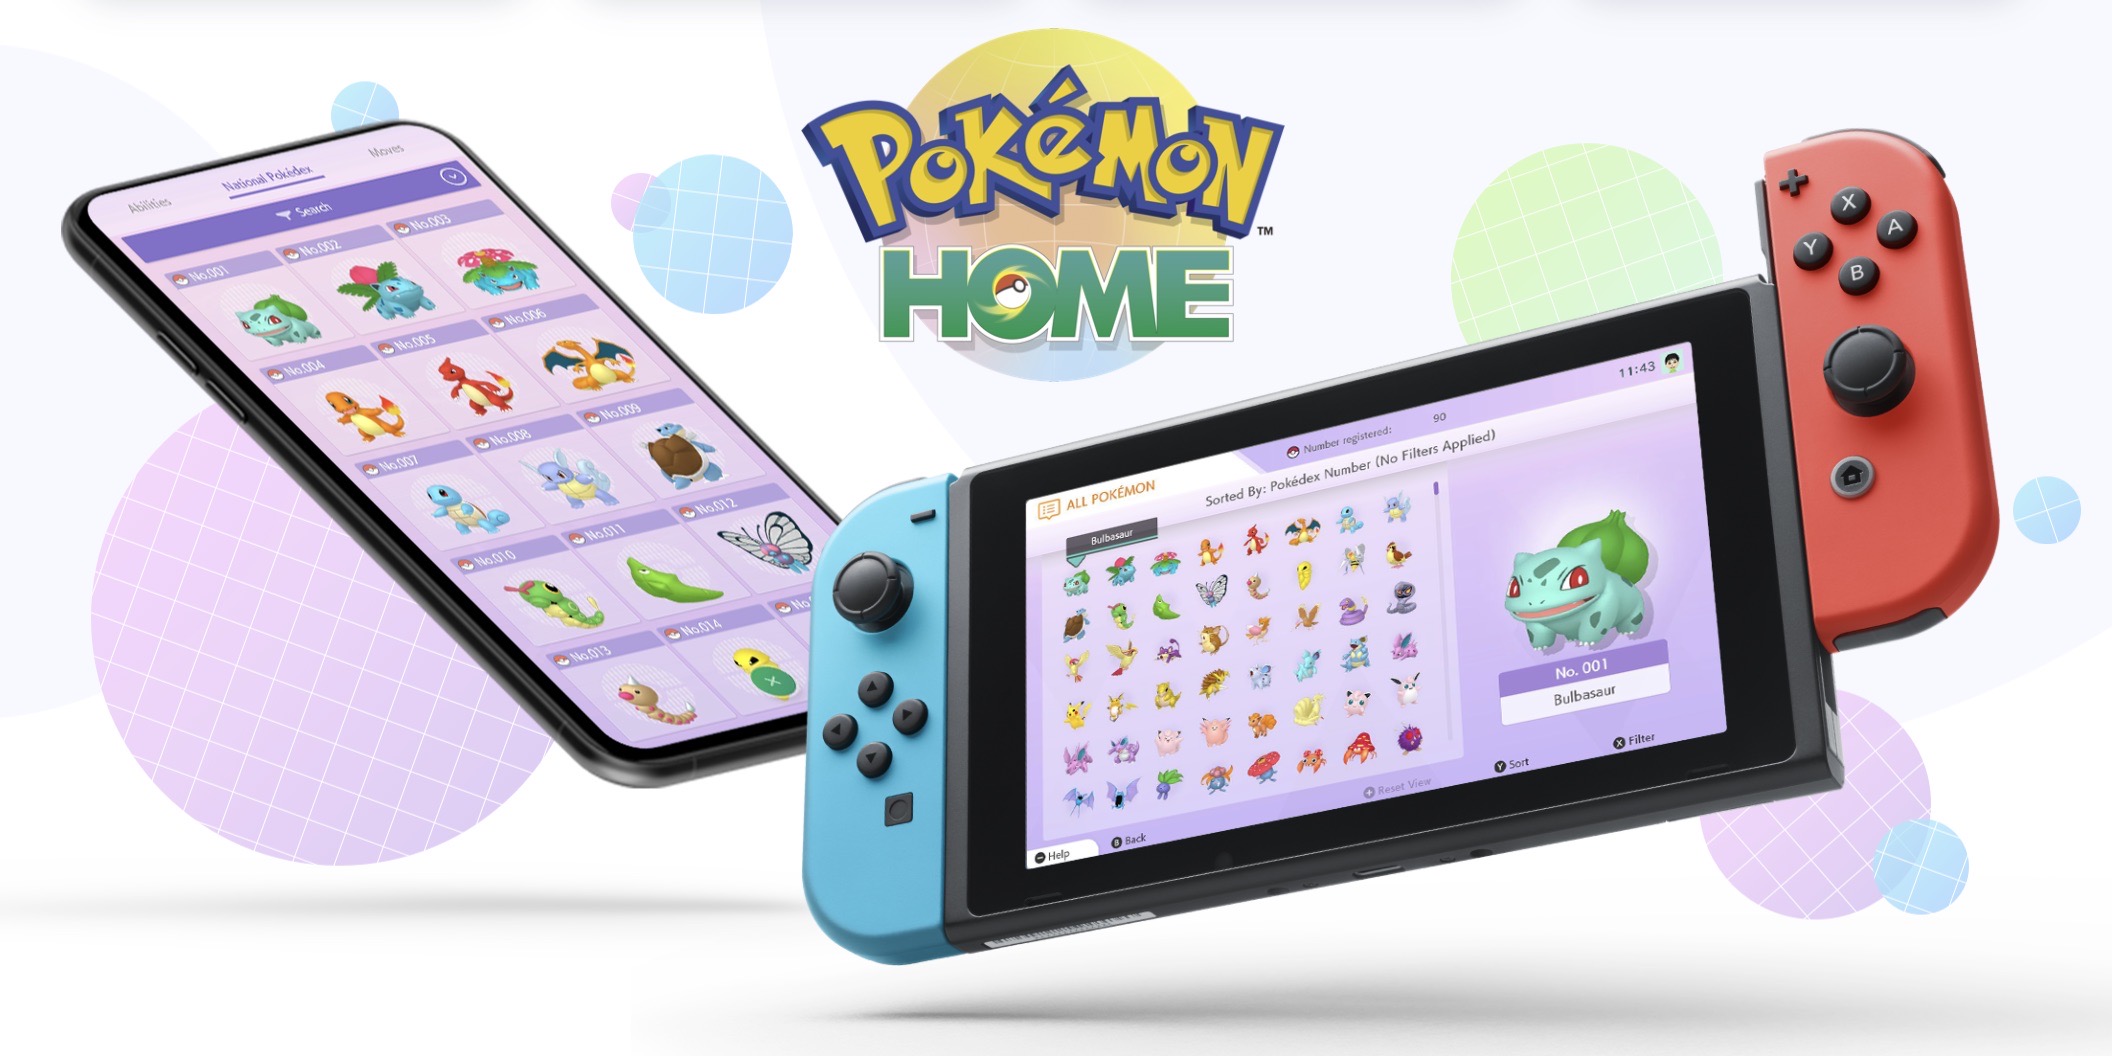 How To Download Pokemon Games On IPad